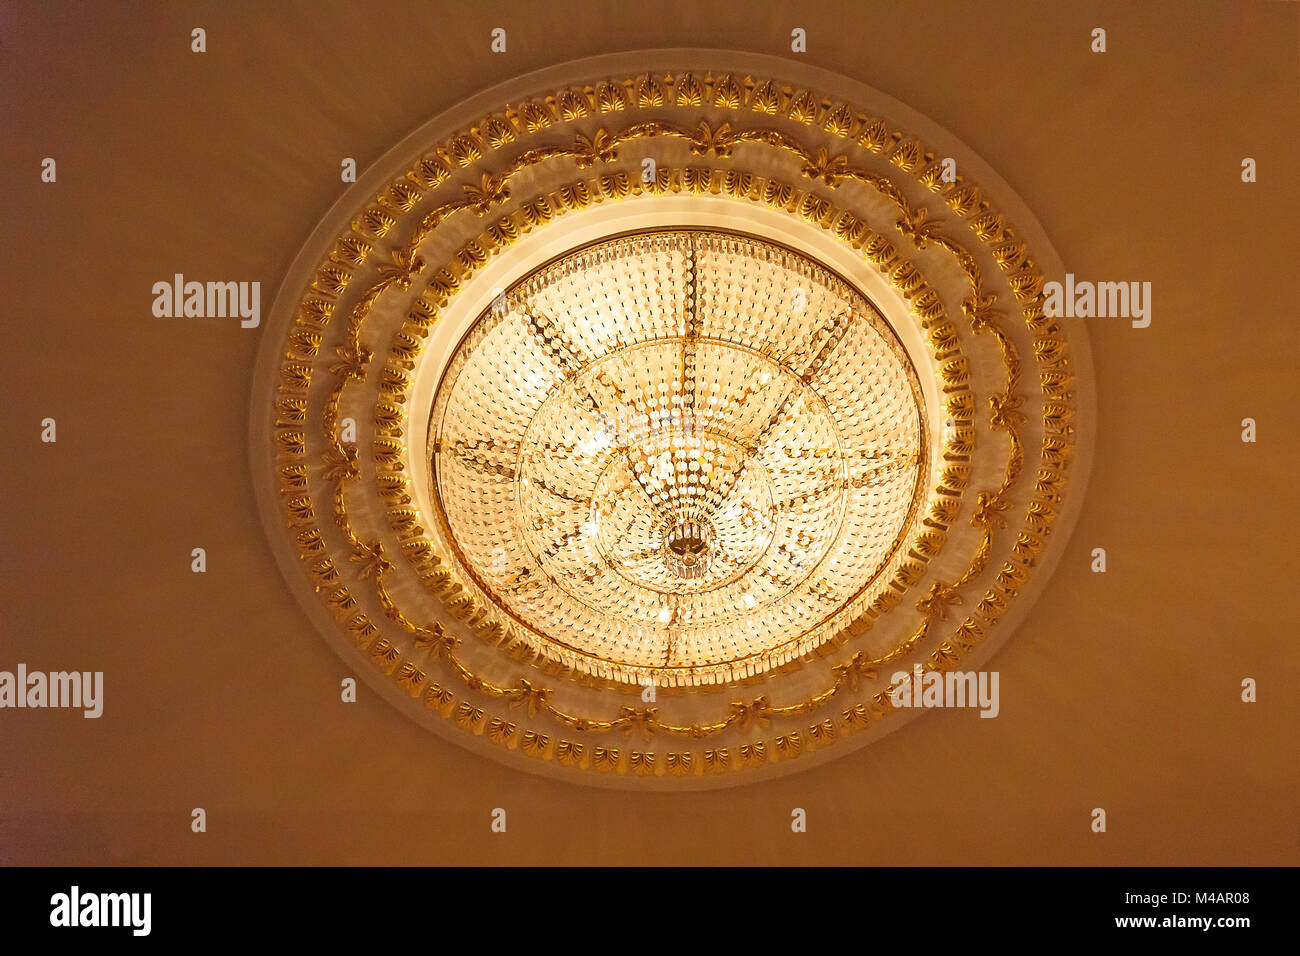 Great chandelier on ceiling Stock Photo